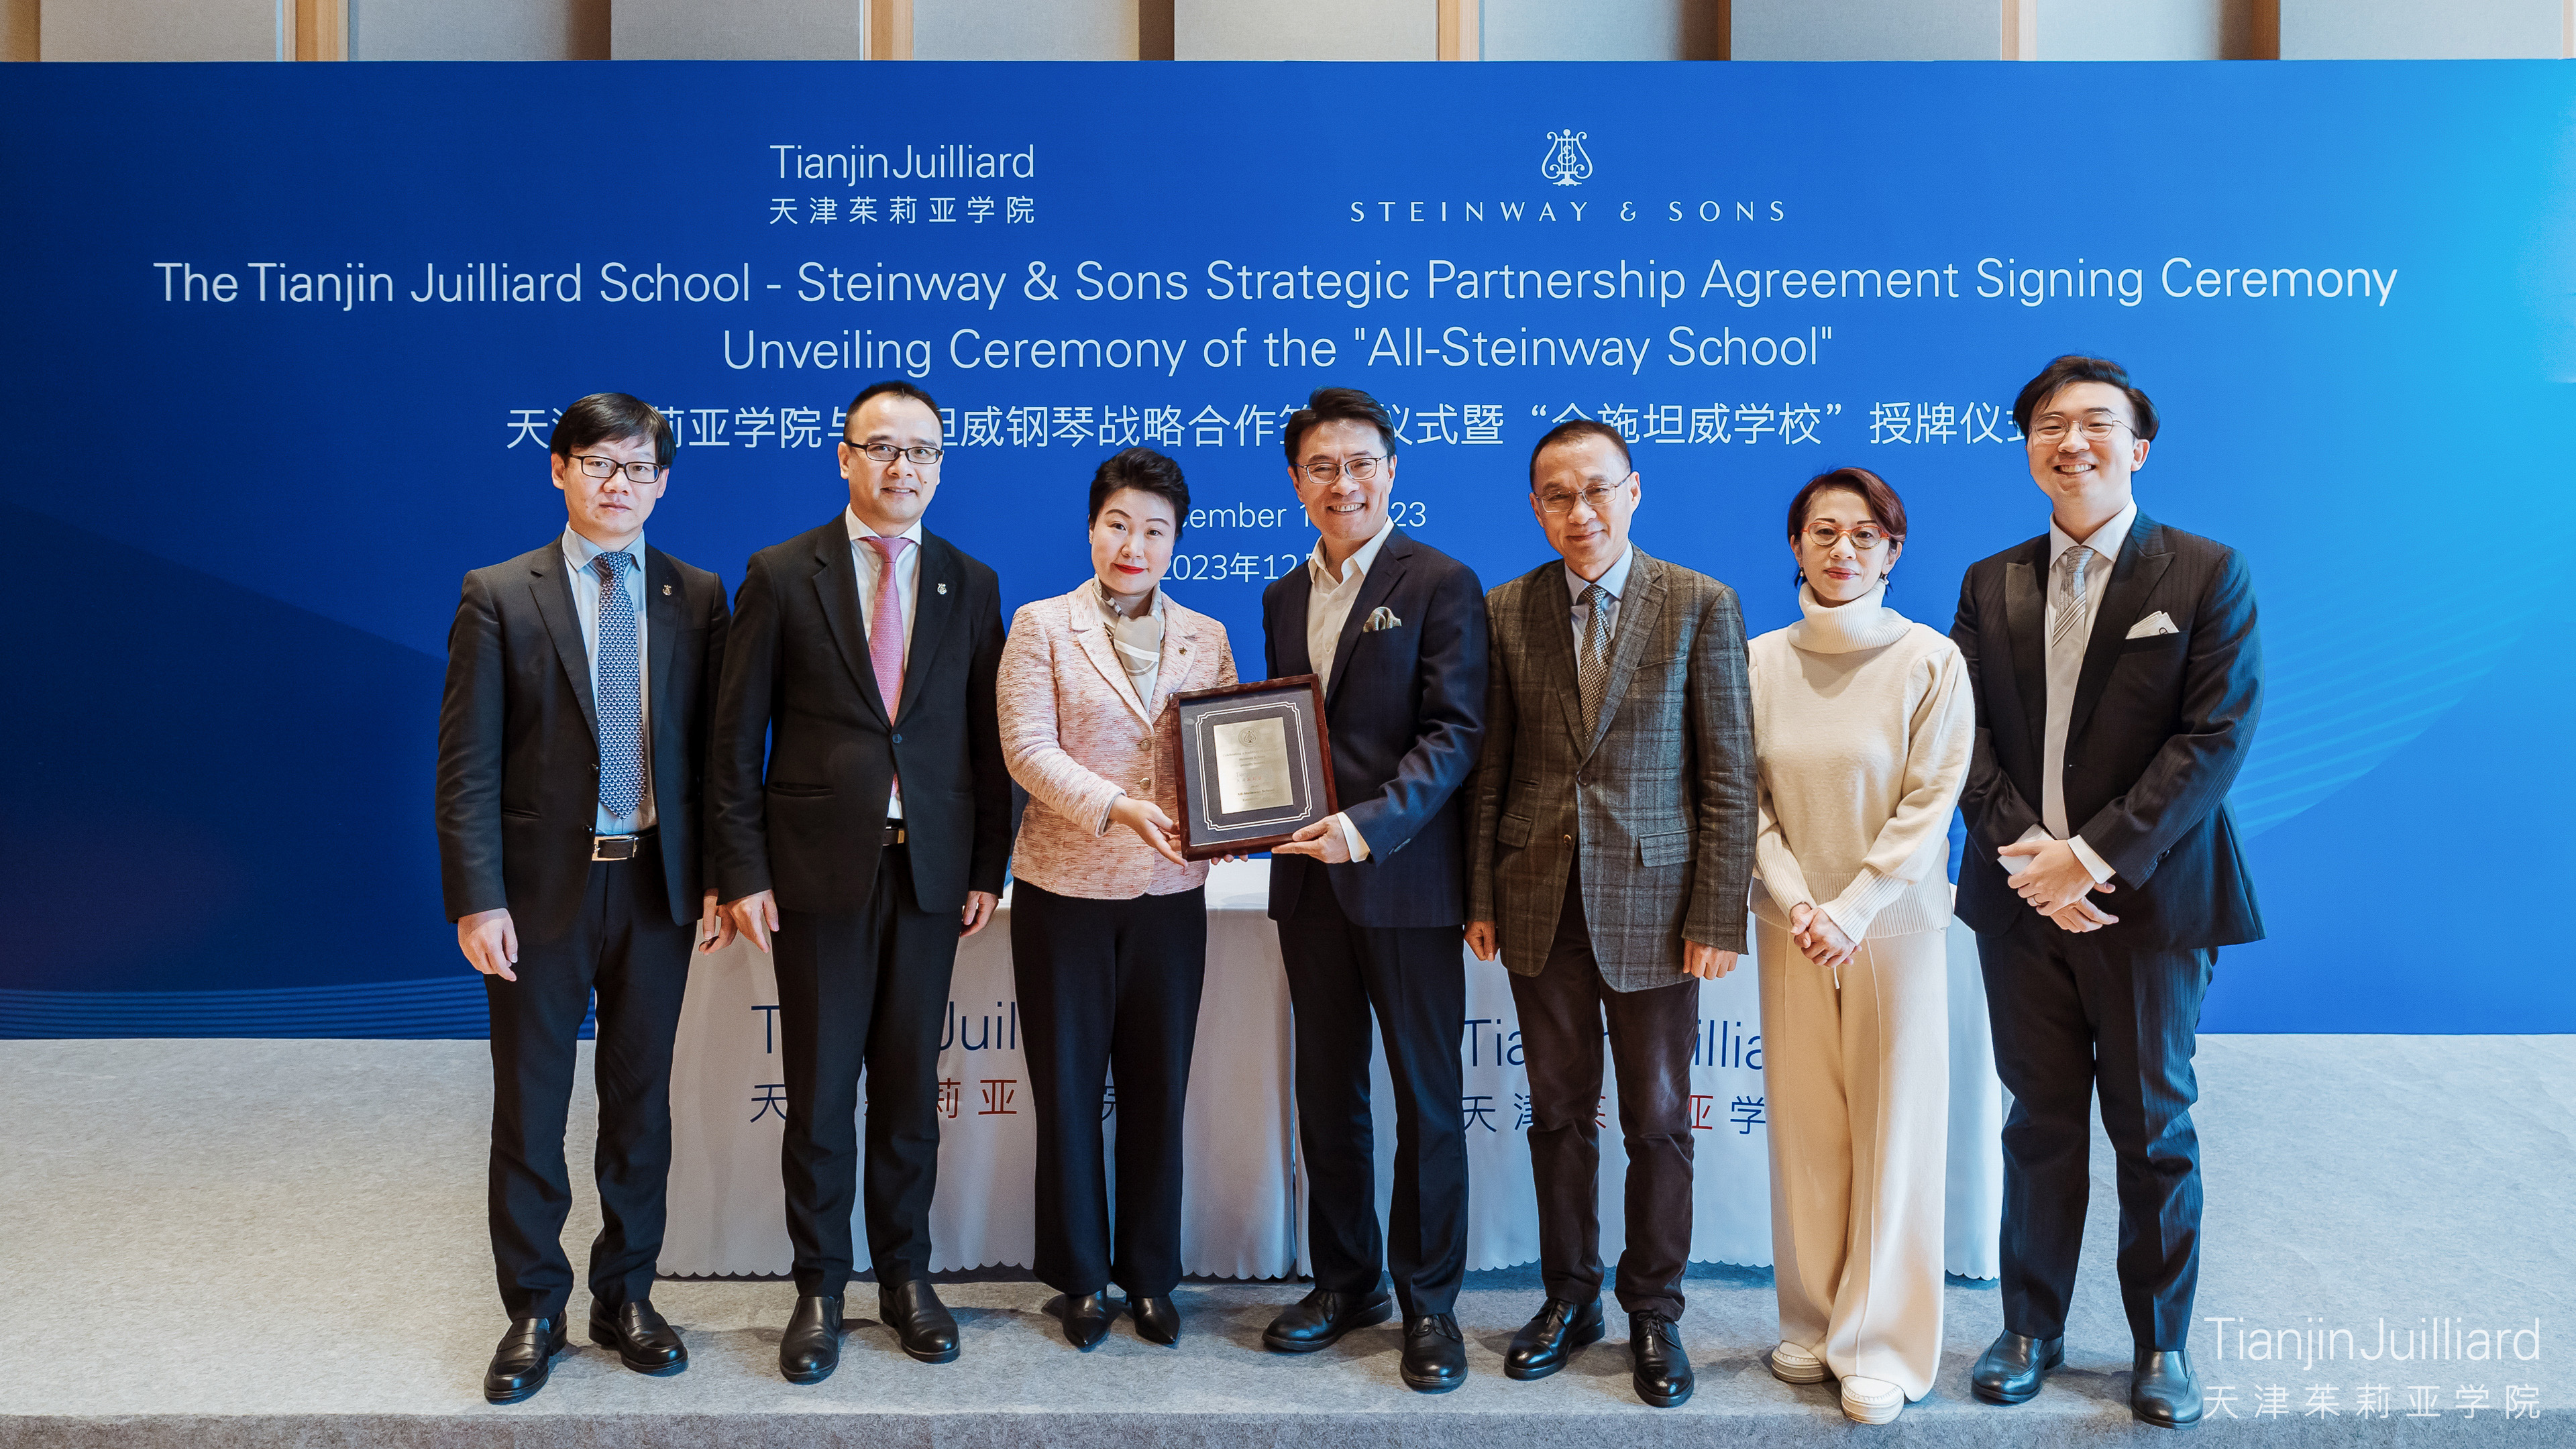 Representatives from Tianjin Juilliard and Steinway and Sons pose with All-Steinway School plaque